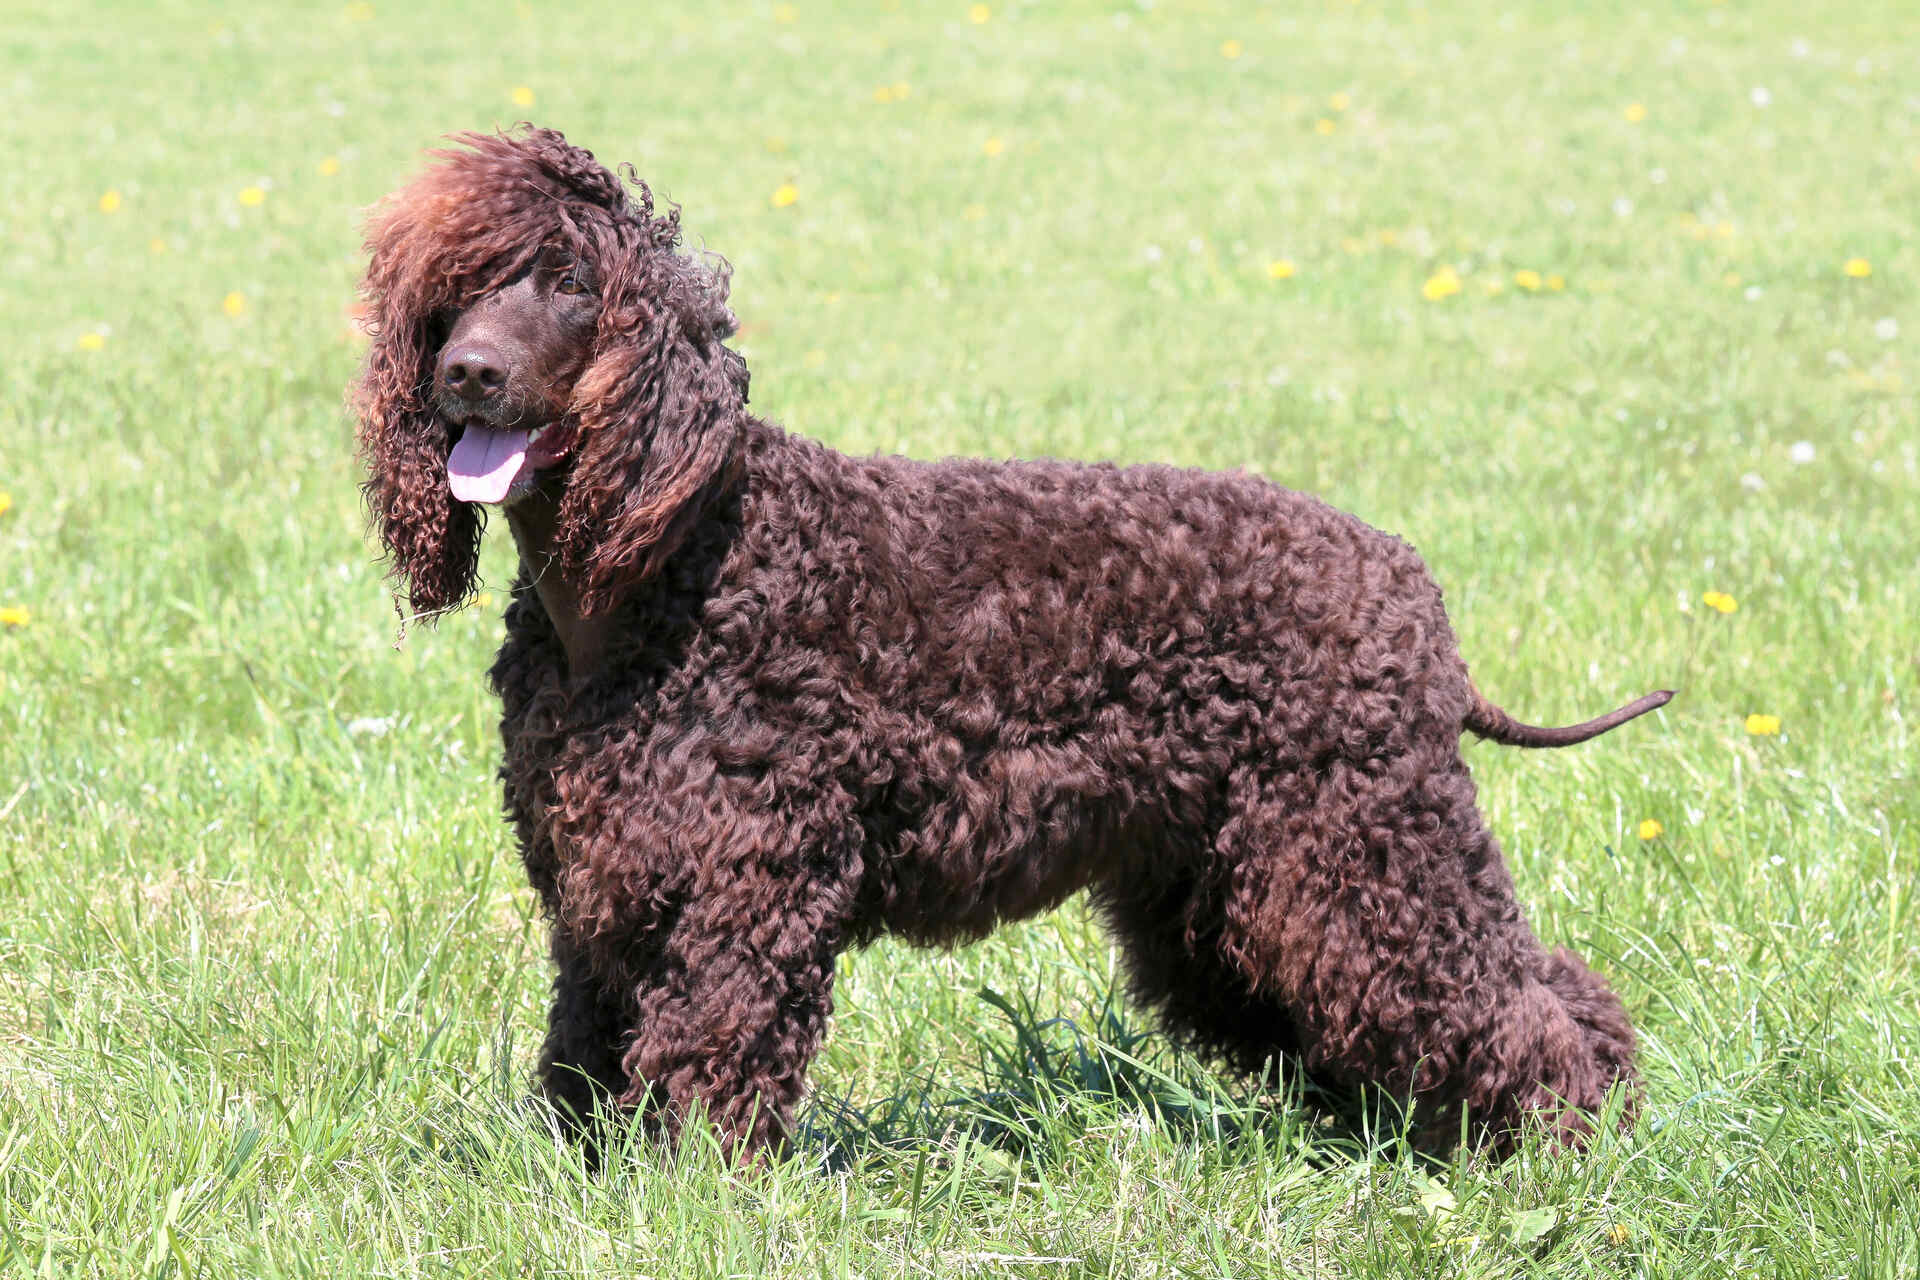 An Irish Water Spaniel standing in a grassy area